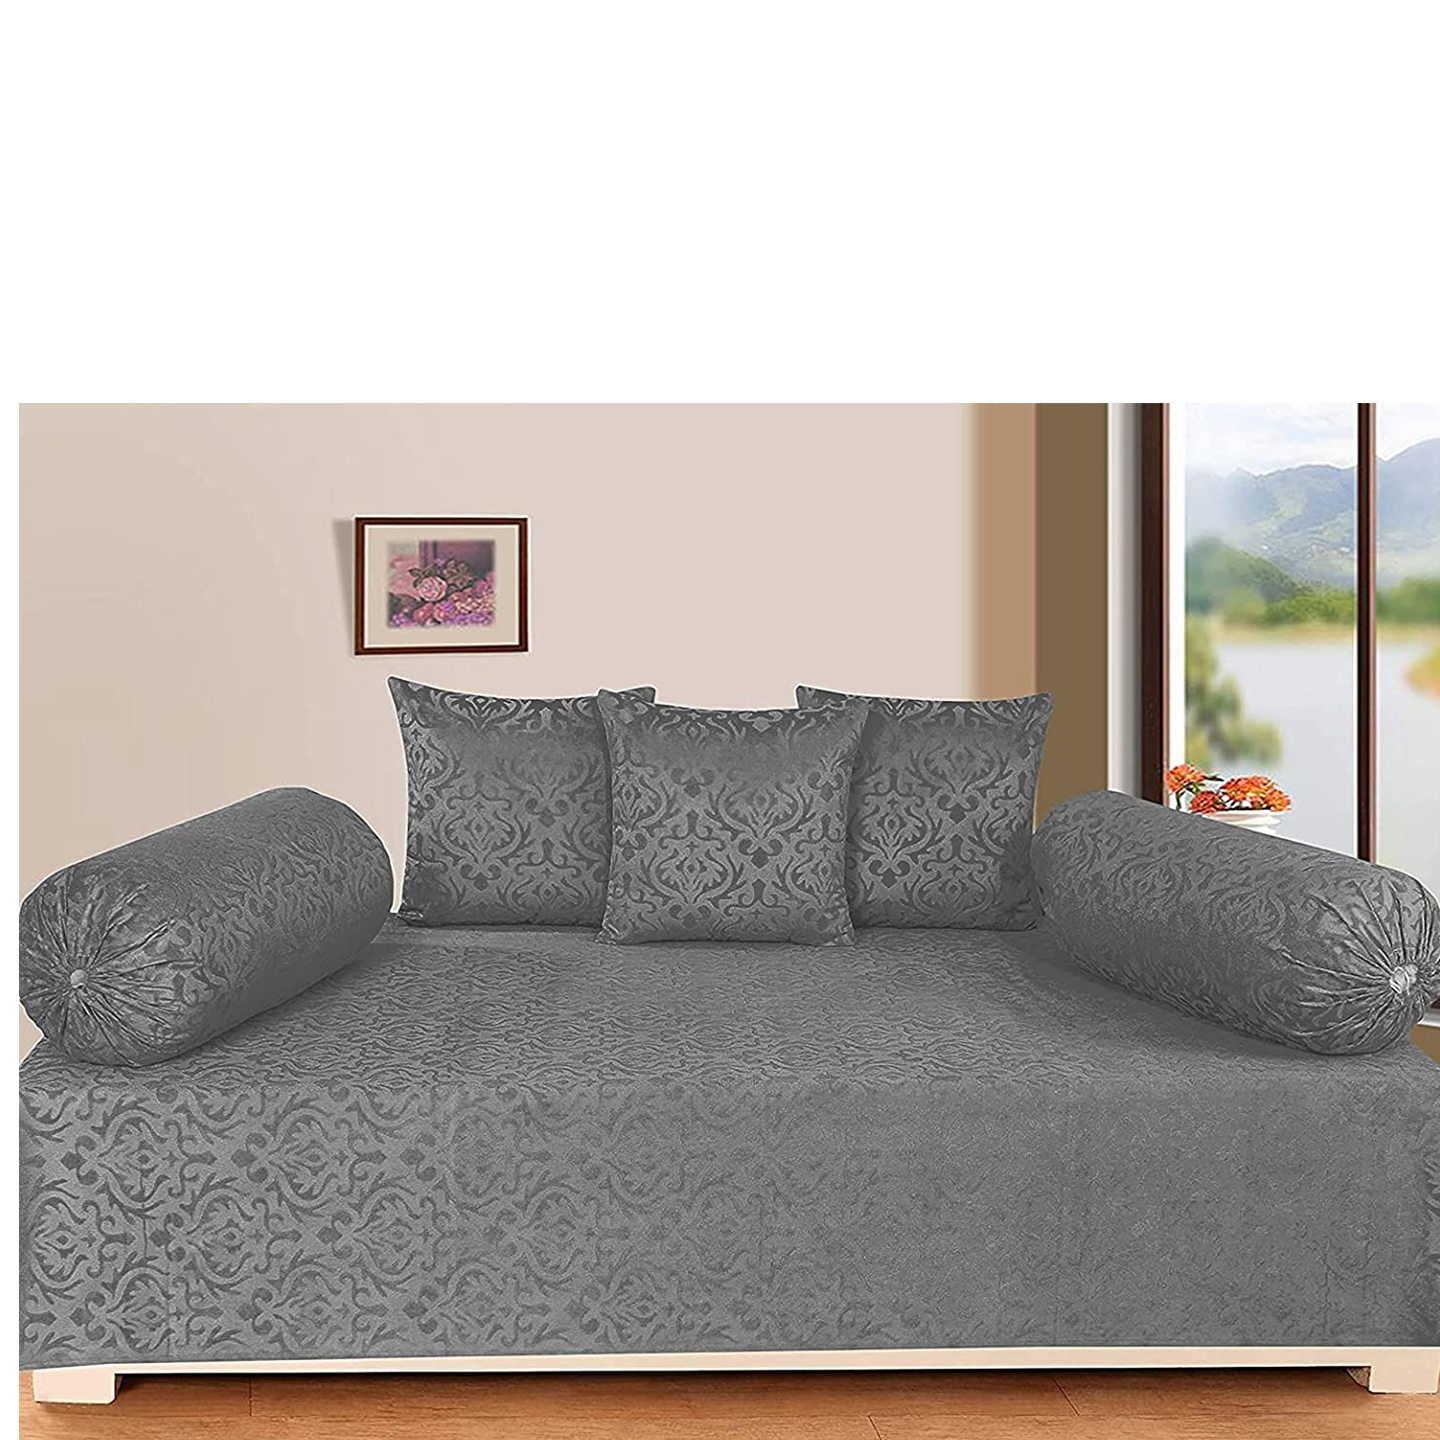 Handtex Home  Premium Velvet Diwan Set of 6 Pieces -1 BedSheet, 2pc Bolster Cover with Dori and 3pc Cushion Covers 6Pc Set-Grey Colour